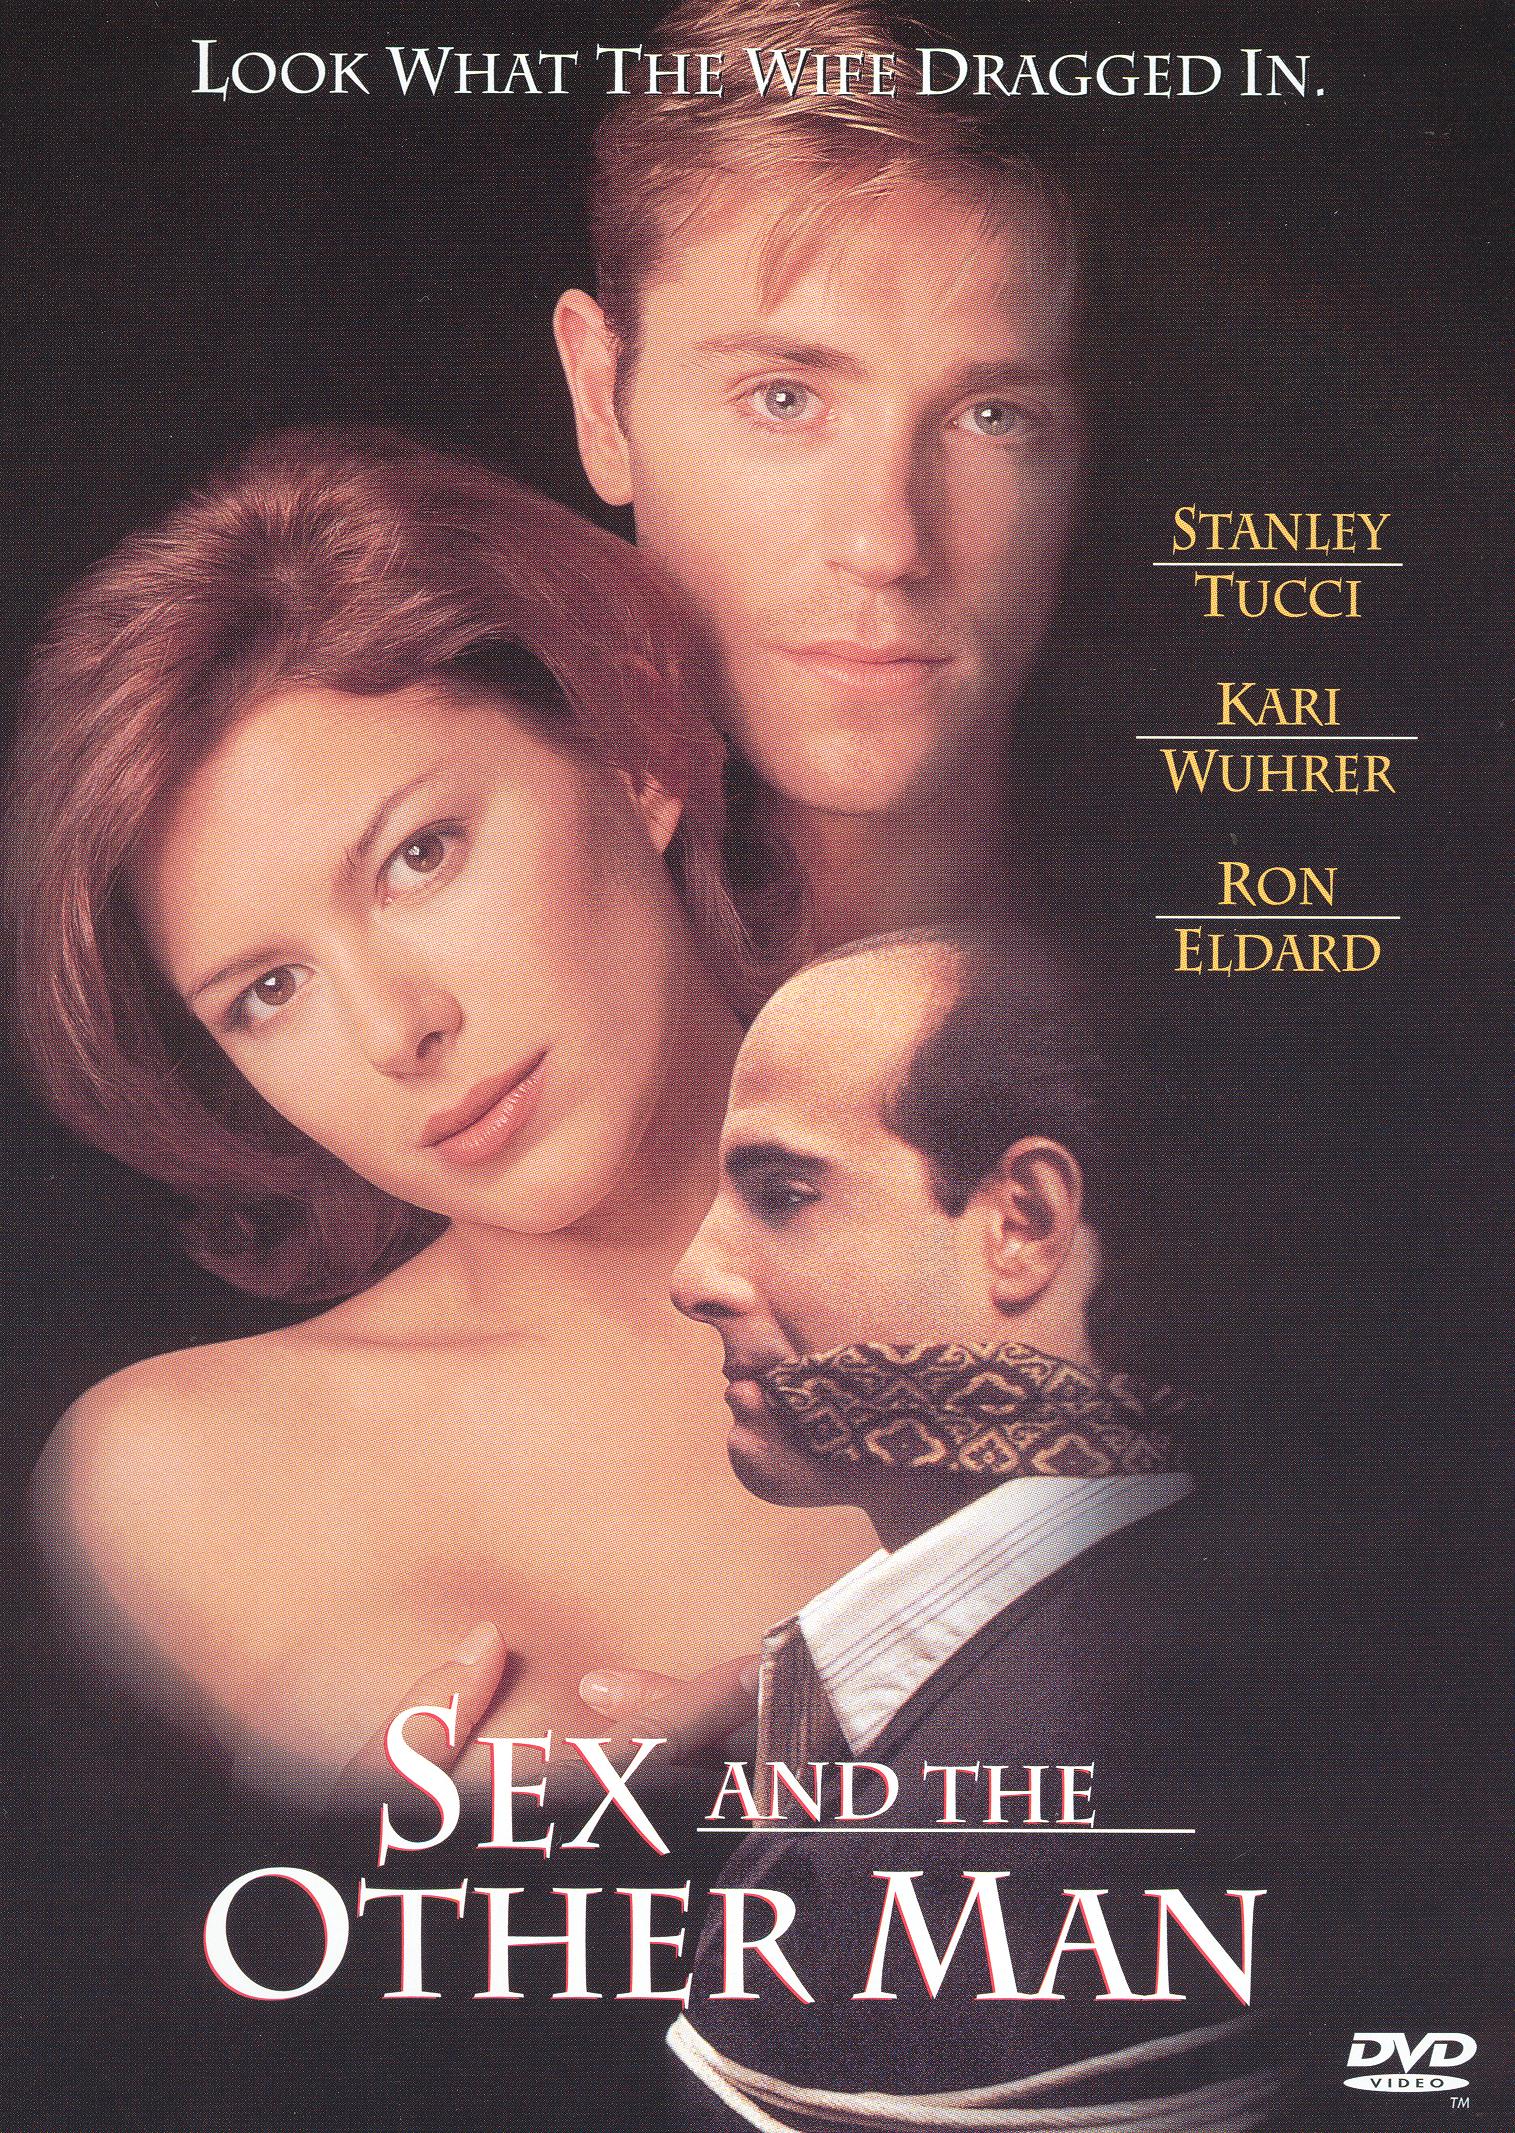 Sex and the Other Man TV Listings and